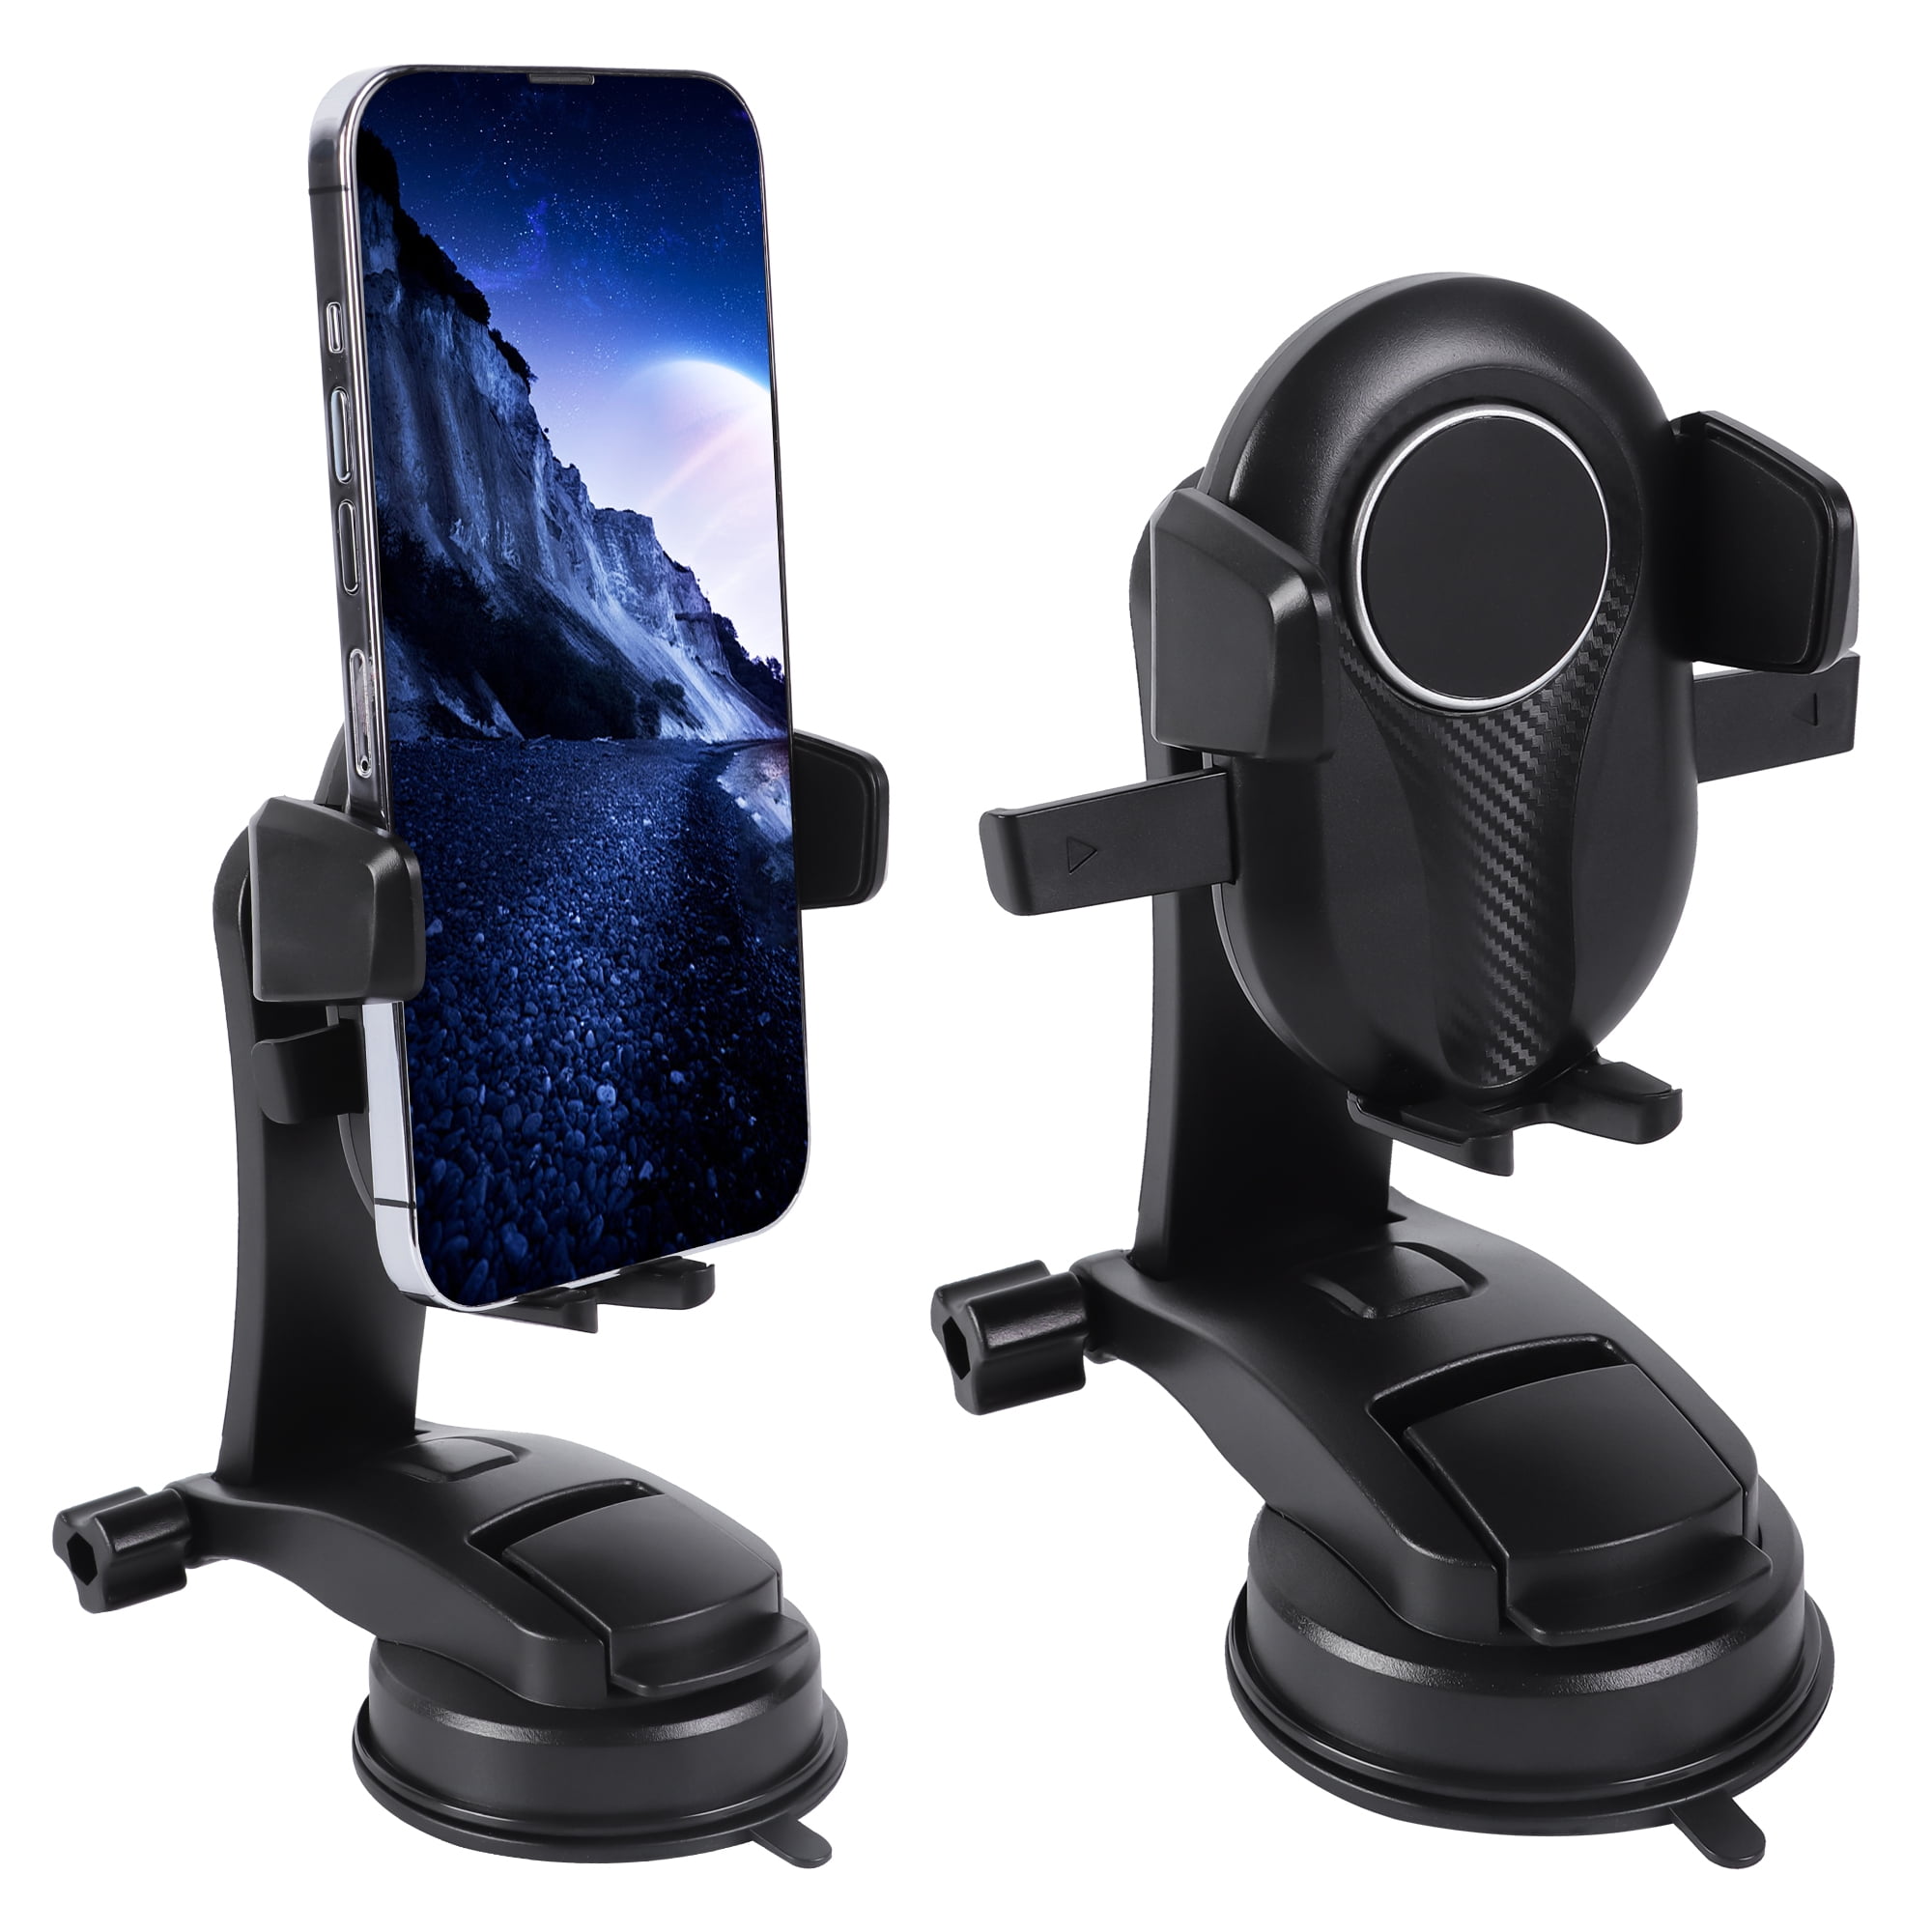 Tohuu Magnetic Car Mount 720-degree Rotation Car Magnetic Phone Mount Car  Phone Holder with 6 Metal Plates & Charging Hole Magnetic Phone Car Mount  carefully 